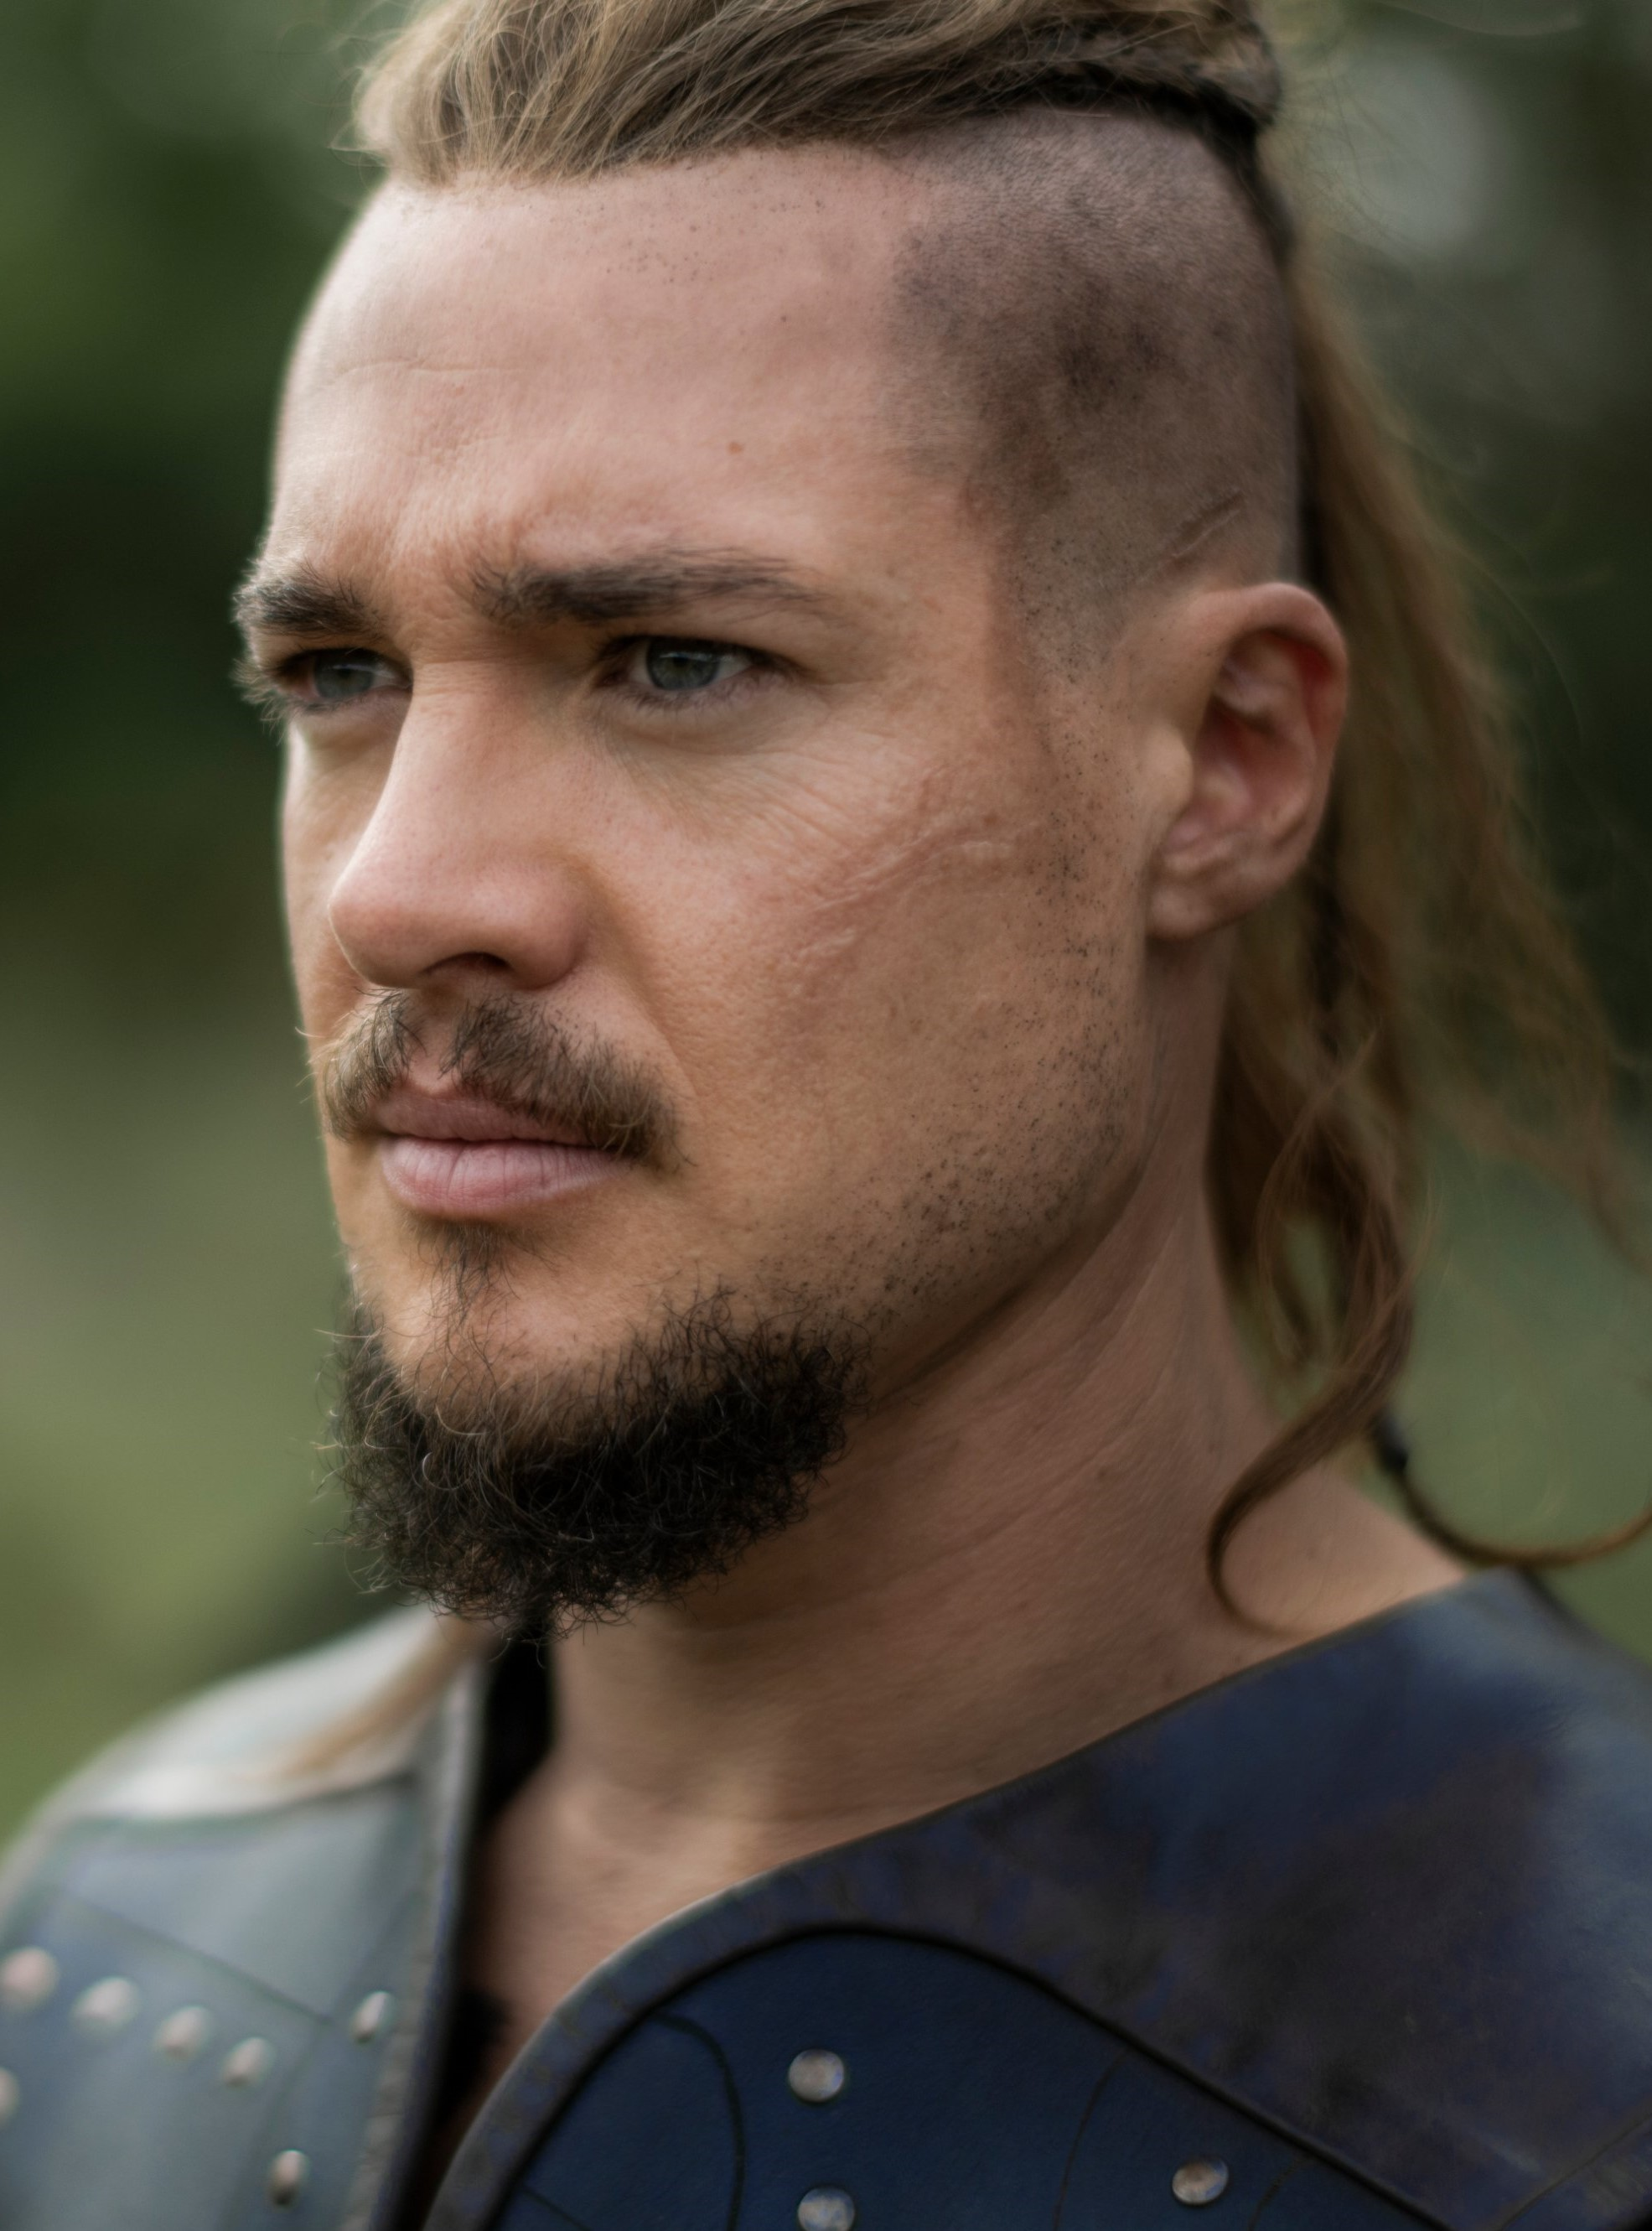 The Last Kingdom explained: Did the real Uhtred the Bold have any